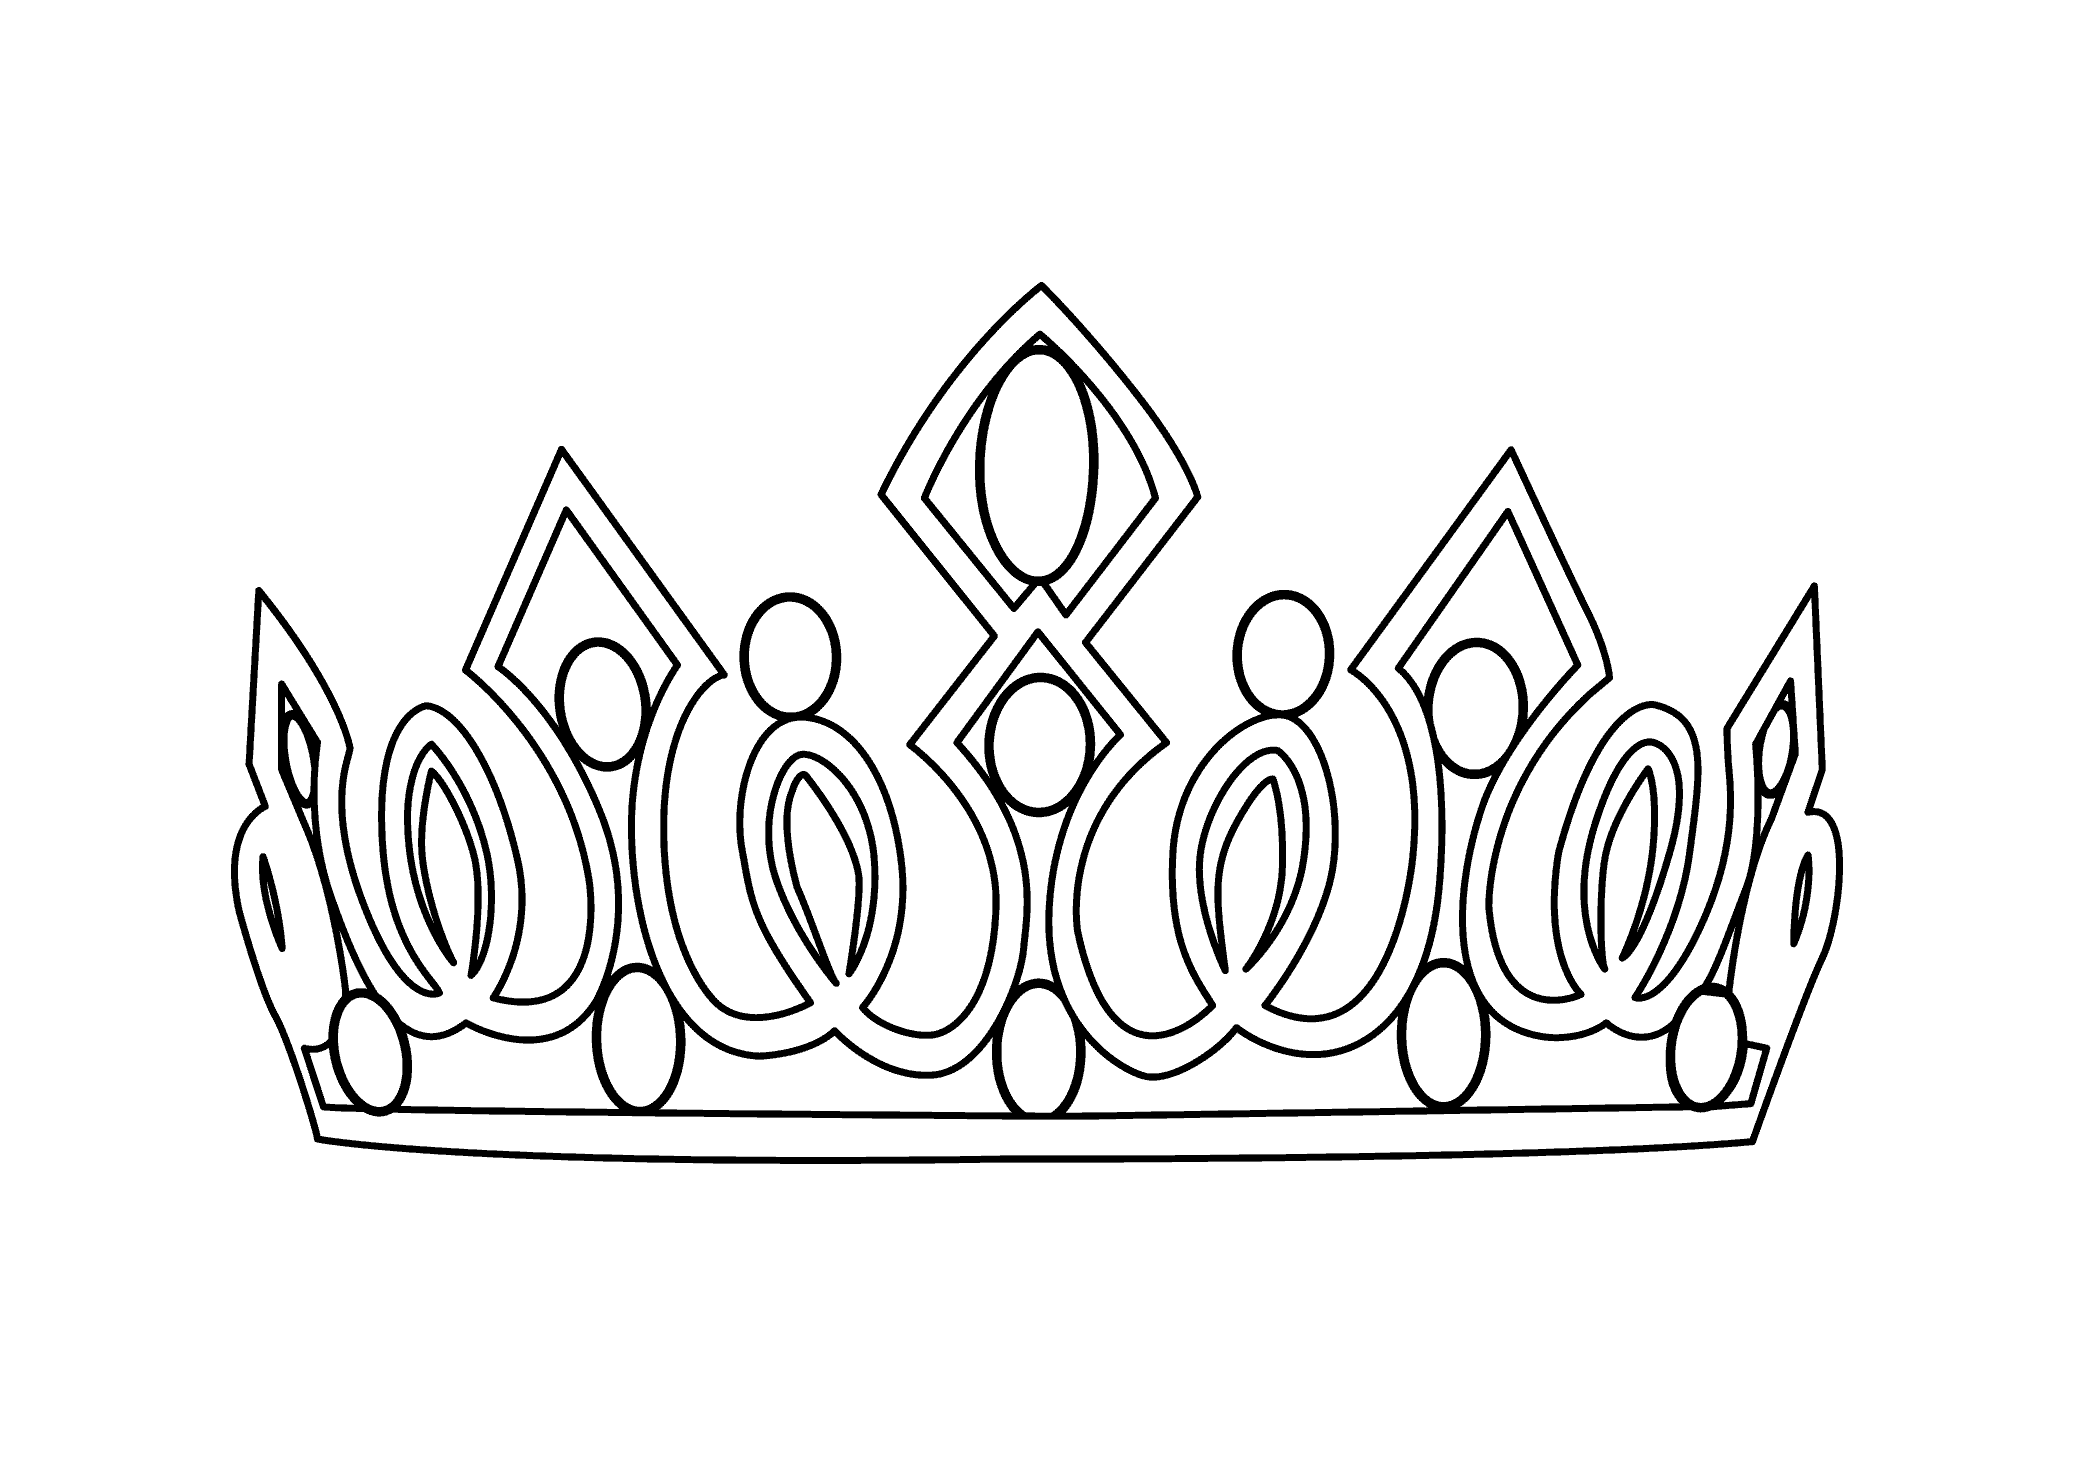 Crown coloring pages to download and print for free